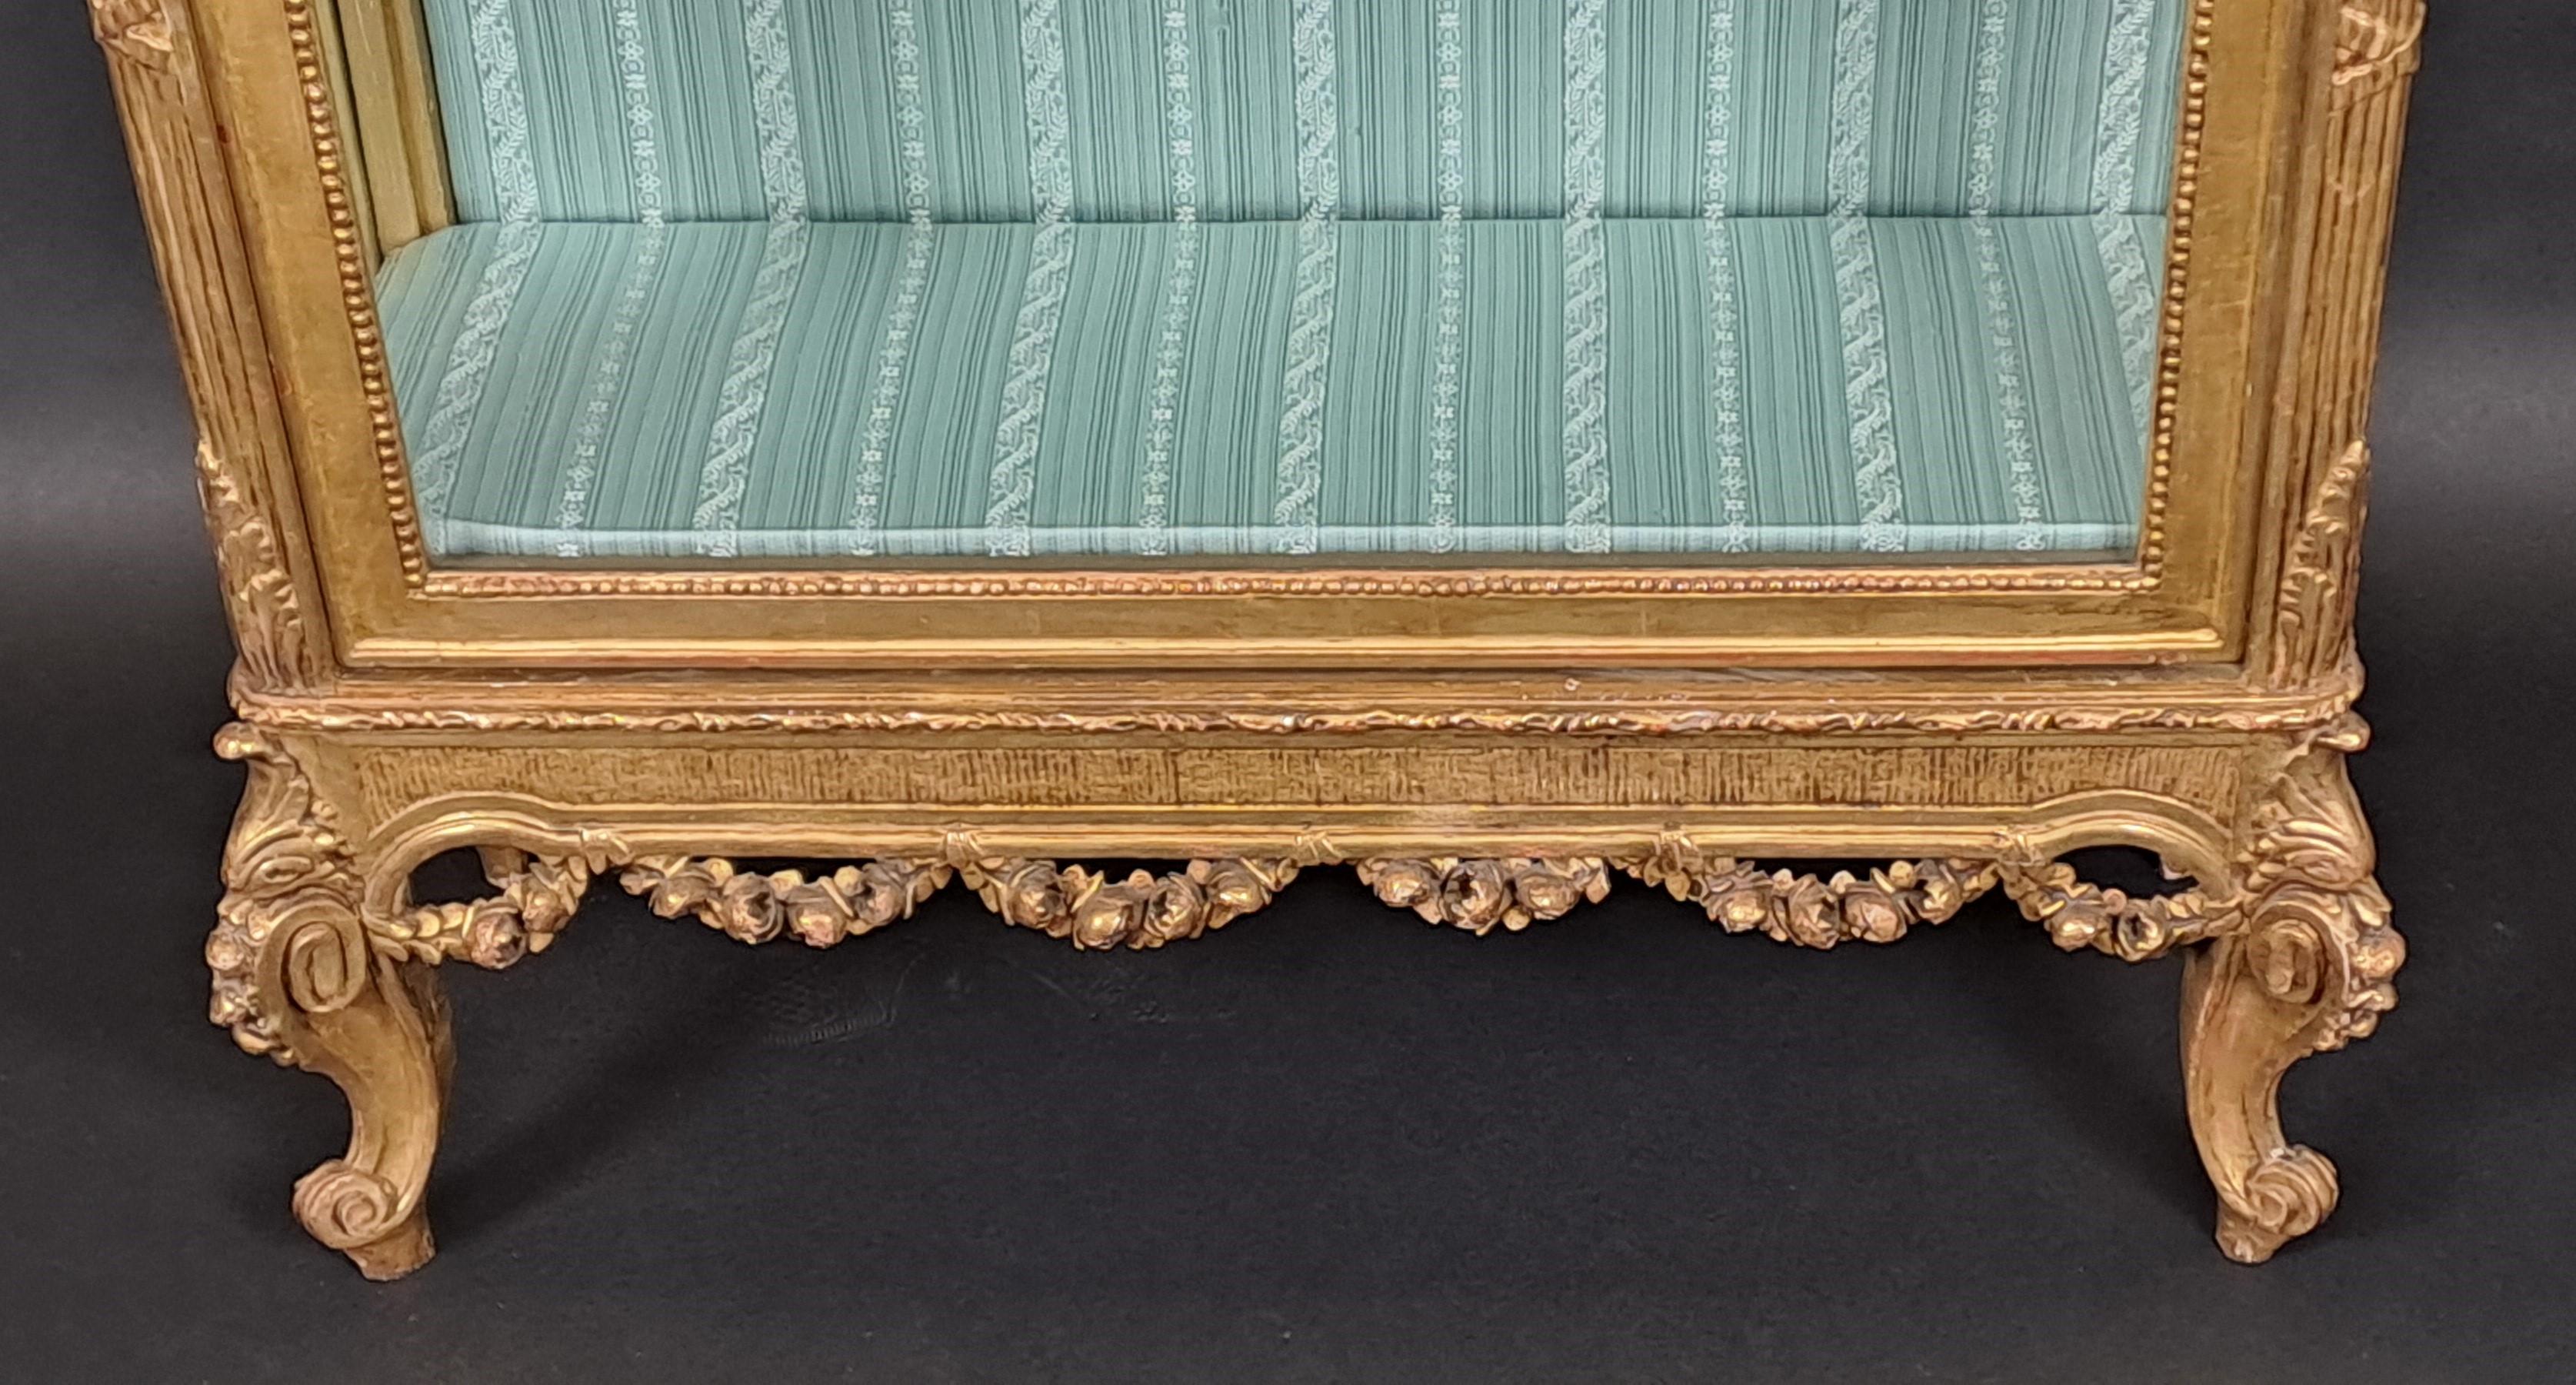 Louis XVI Transition Style Vitrine In Golden Wood From The 19th Century For Sale